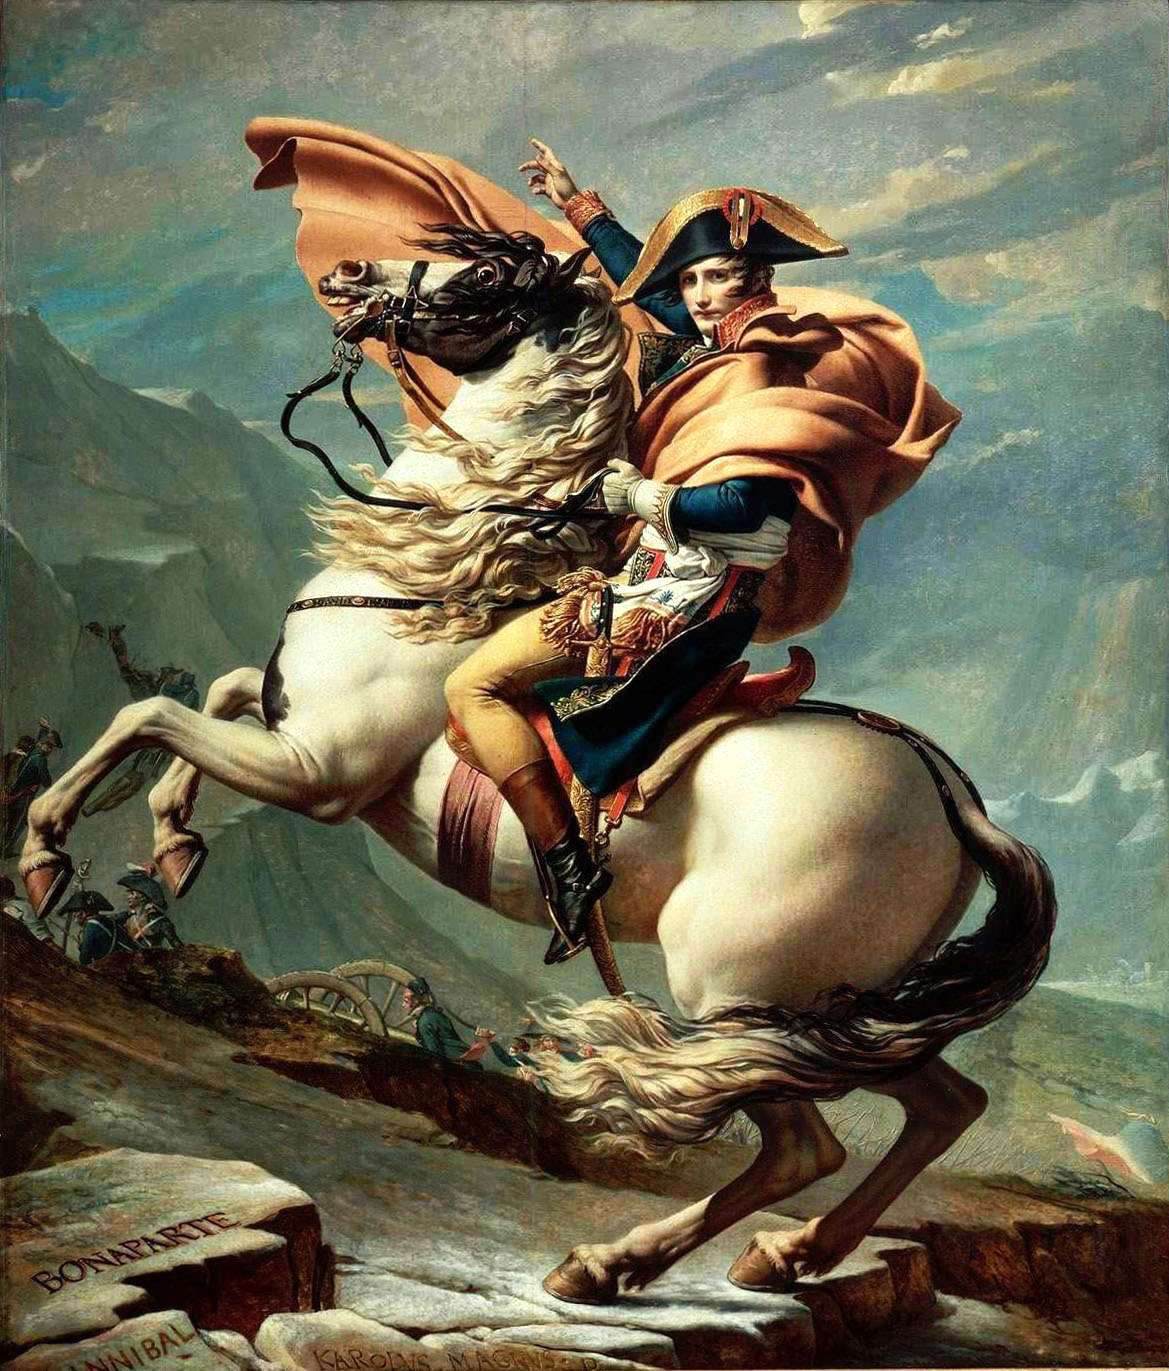 General Napoleon Bonaparte first rises to national prominence being named to defend the French National Convention against armed counter-revolutionary rioters threatening the three year old revolutionary government